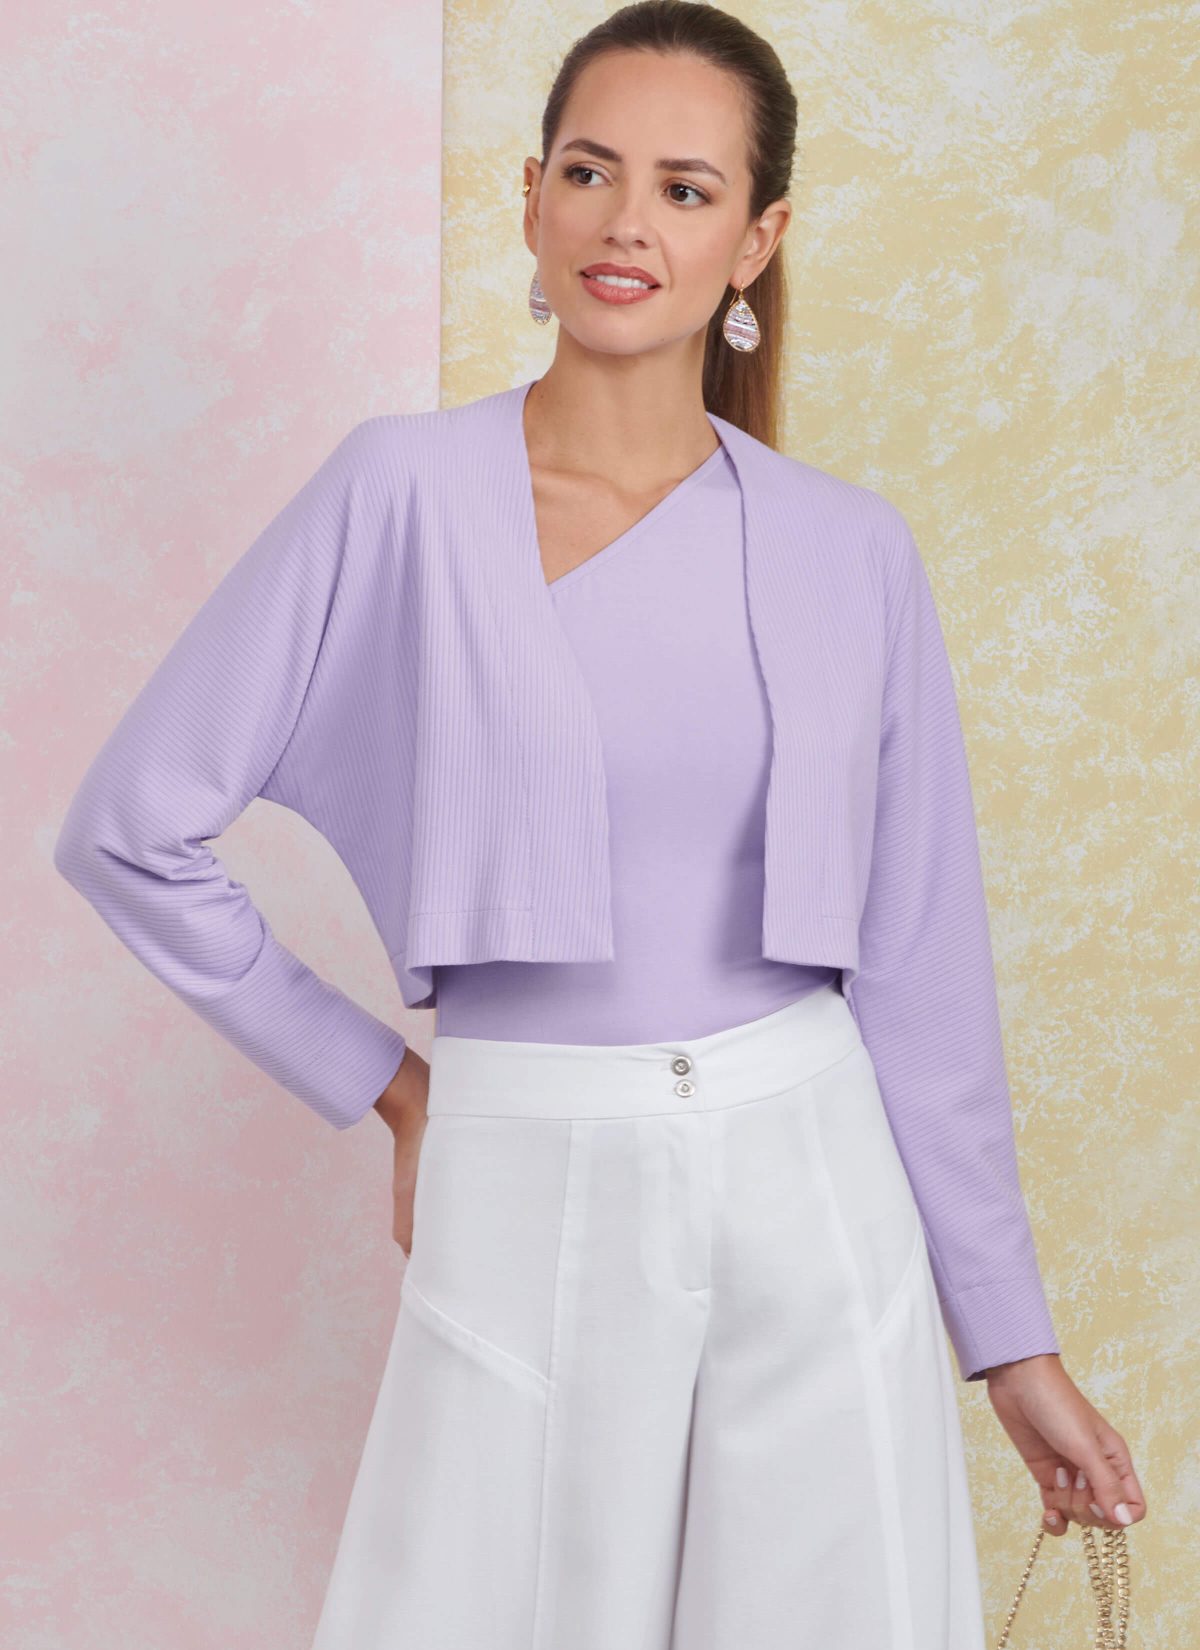 Simplicity Sewing Pattern S9925 Misses' Trousers, Knit Shrug and Top